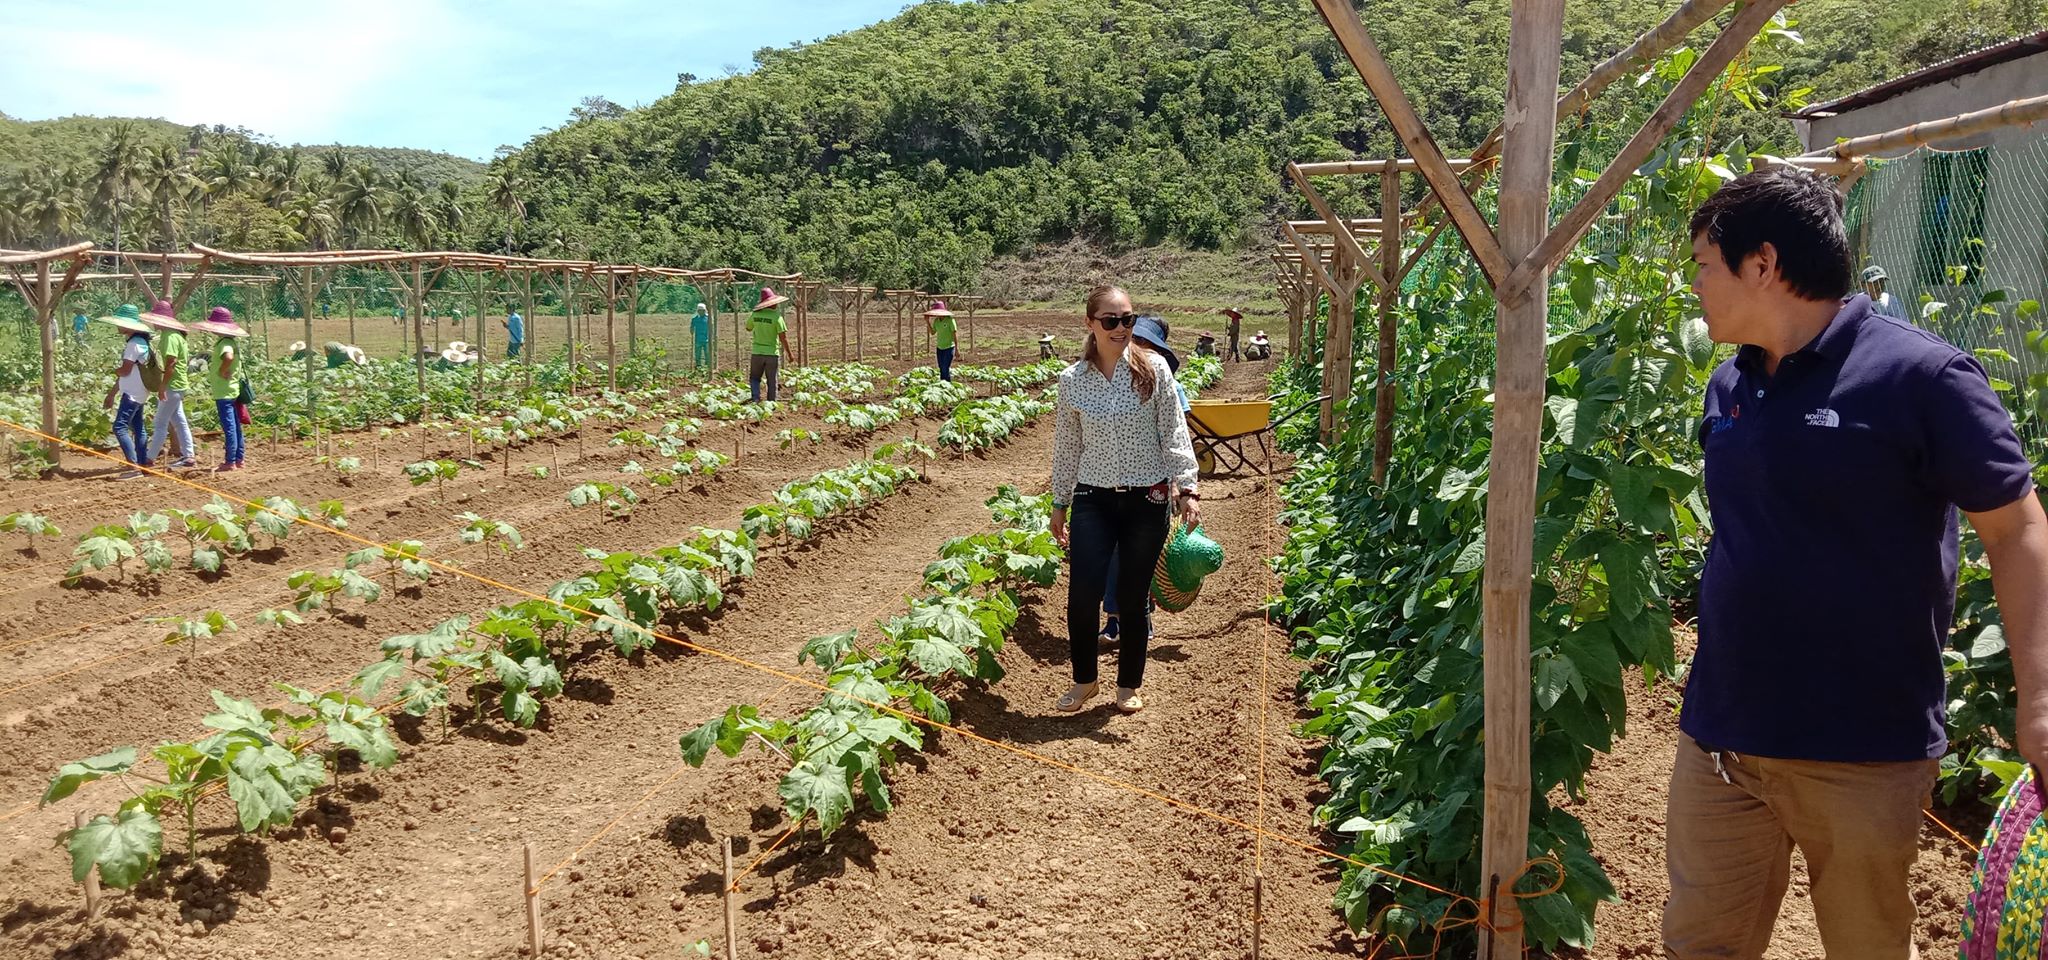 With the enhanced community quarantine in effect in the island of Cebu, the National Nutrition Council in Central Visayas is worried that the Cebuanos will not have access to nutritious food such as vegetables and fruits which are also grown in Cebu’s farms. | CDN Digital file photo